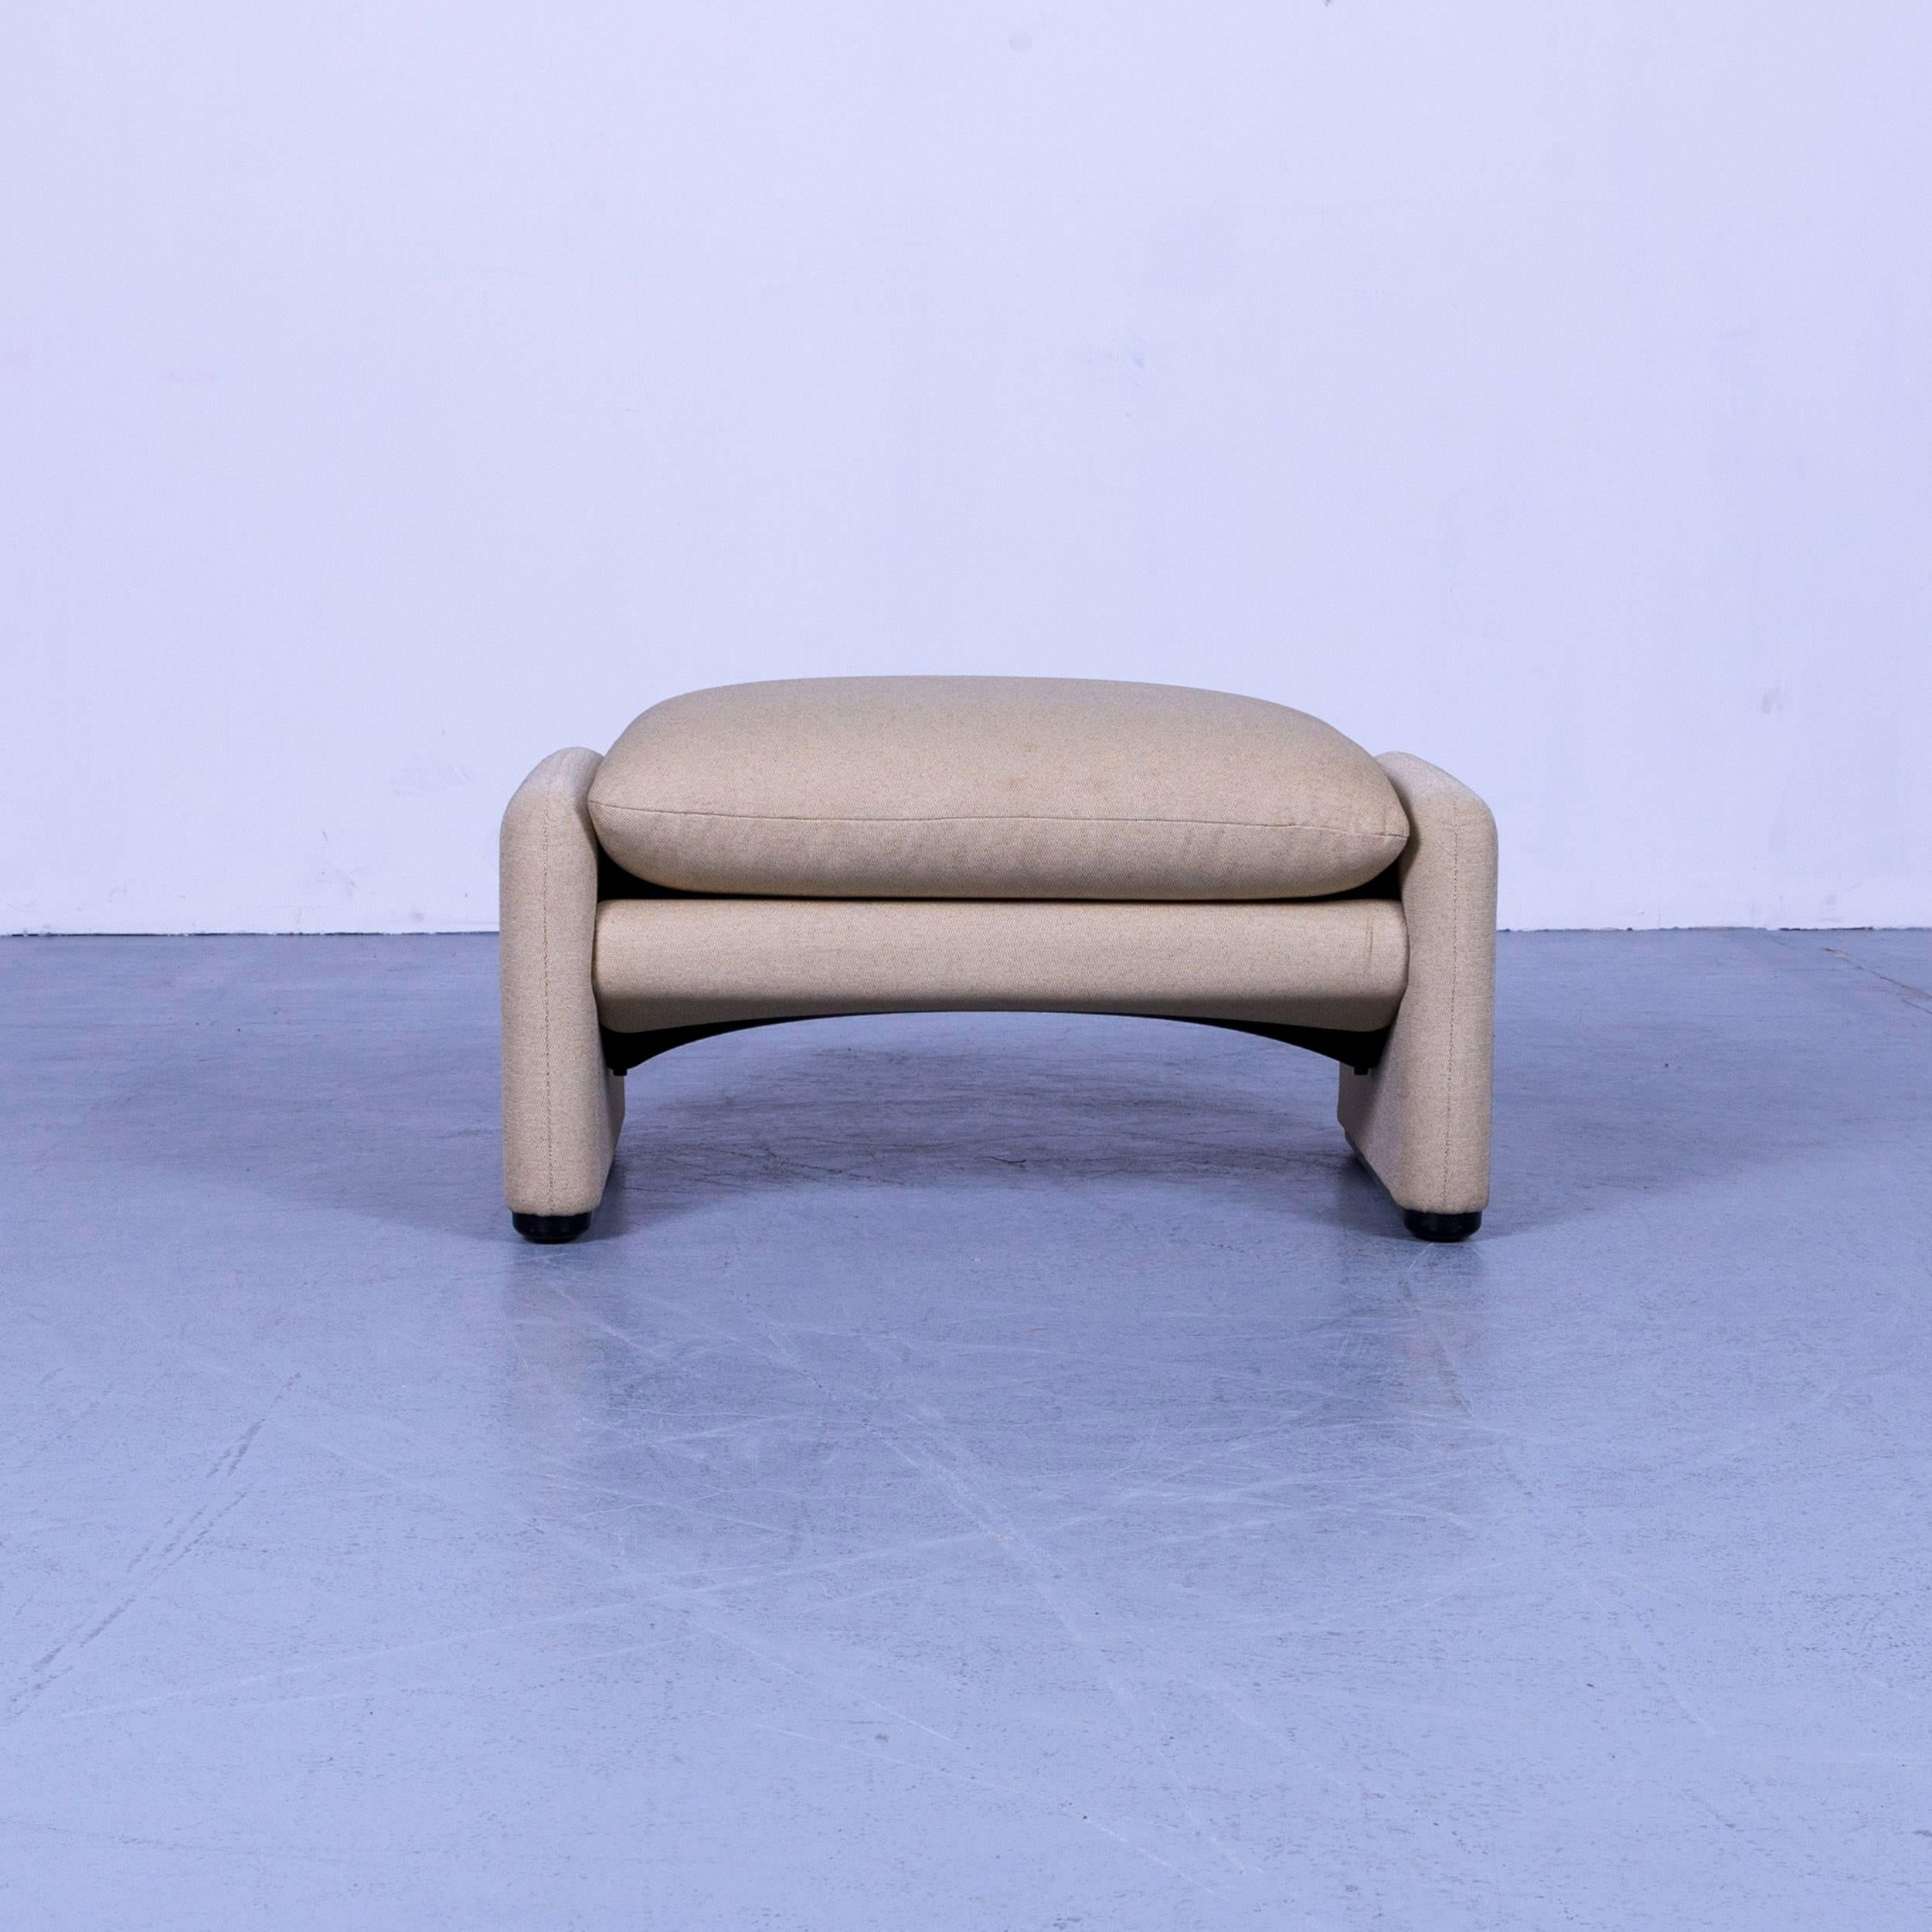 We offer delivery options to most destinations on earth. Find our shipping quotes at the bottom of this page in the shipping section.

An Cassina Maralunga Fabric Foot-Stool Off-White

Shipping:

An on point shipping process is our priority. 

For